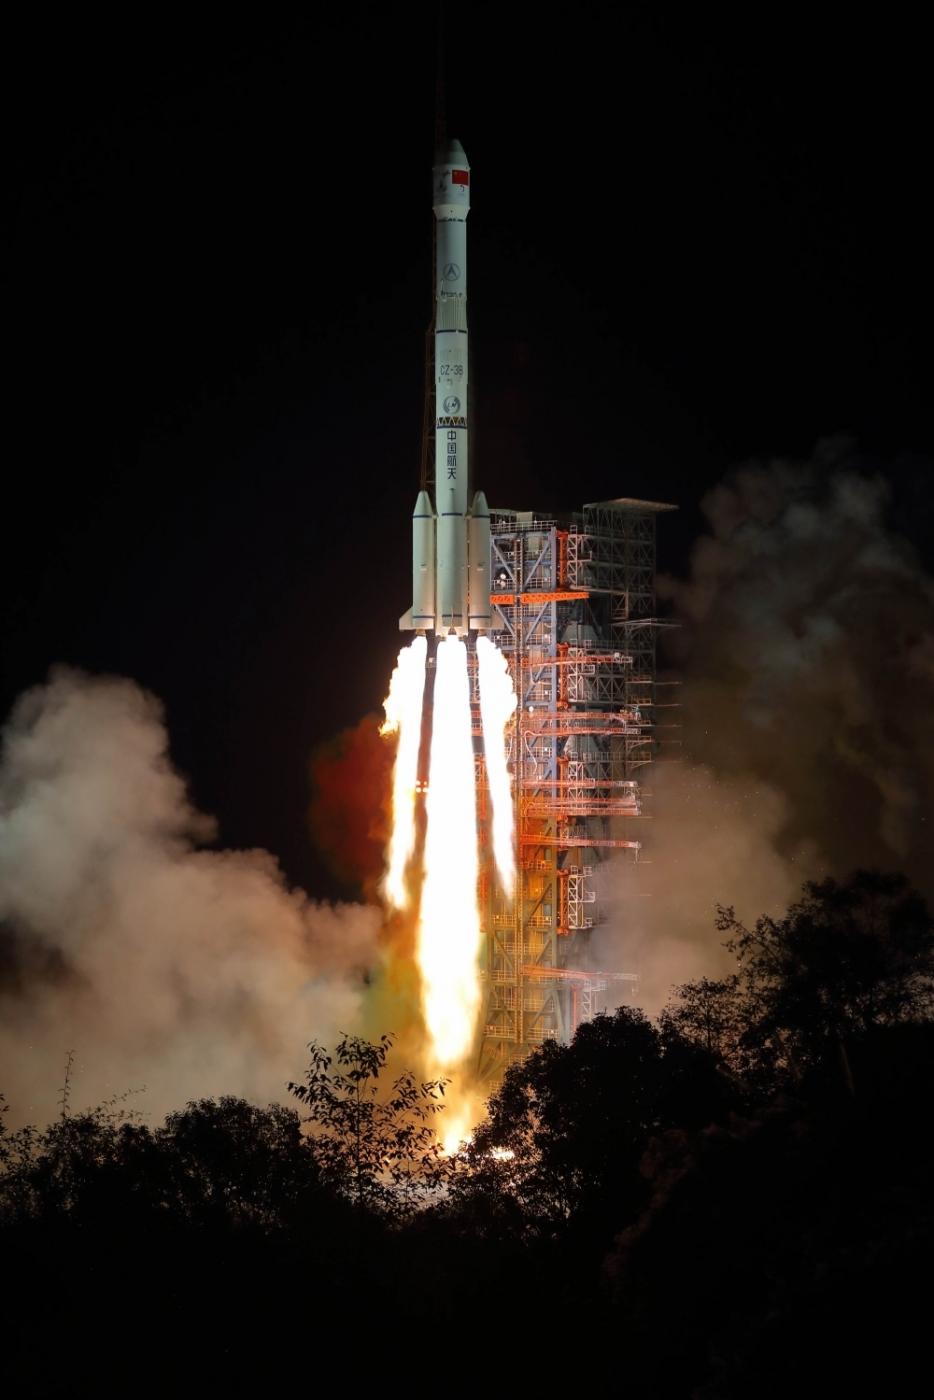 XICHANG, Dec. 8, 2018 (Xinhua) -- China launches Chang'e-4 lunar probe in the Xichang Satellite Launch Center in southwest China's Sichuan Province, Dec. 8, 2018. The probe is expected to make the first-ever soft landing on the far side of the moon. A Long March-3B rocket, carrying the probe including a lander and a rover, blasted off from Xichang at 2:23 a.m., opening a new chapter in lunar exploration. The scientific tasks of the Chang'e-4 mission include low-frequency radio astronomical observation, surveying the terrain and landforms, detecting the mineral composition and shallow lunar surface structure, and measuring the neutron radiation and neutral atoms to study the environment on the far side of the moon, the China National Space Administration announced. China has promoted international cooperation in its lunar exploration program, with four scientific payloads in the Chang'e-4 mission developed by scientists from the Netherlands, Germany, Sweden and Saudi Arabia. (Xinhua/Jiang Hongjing/IANS) by .